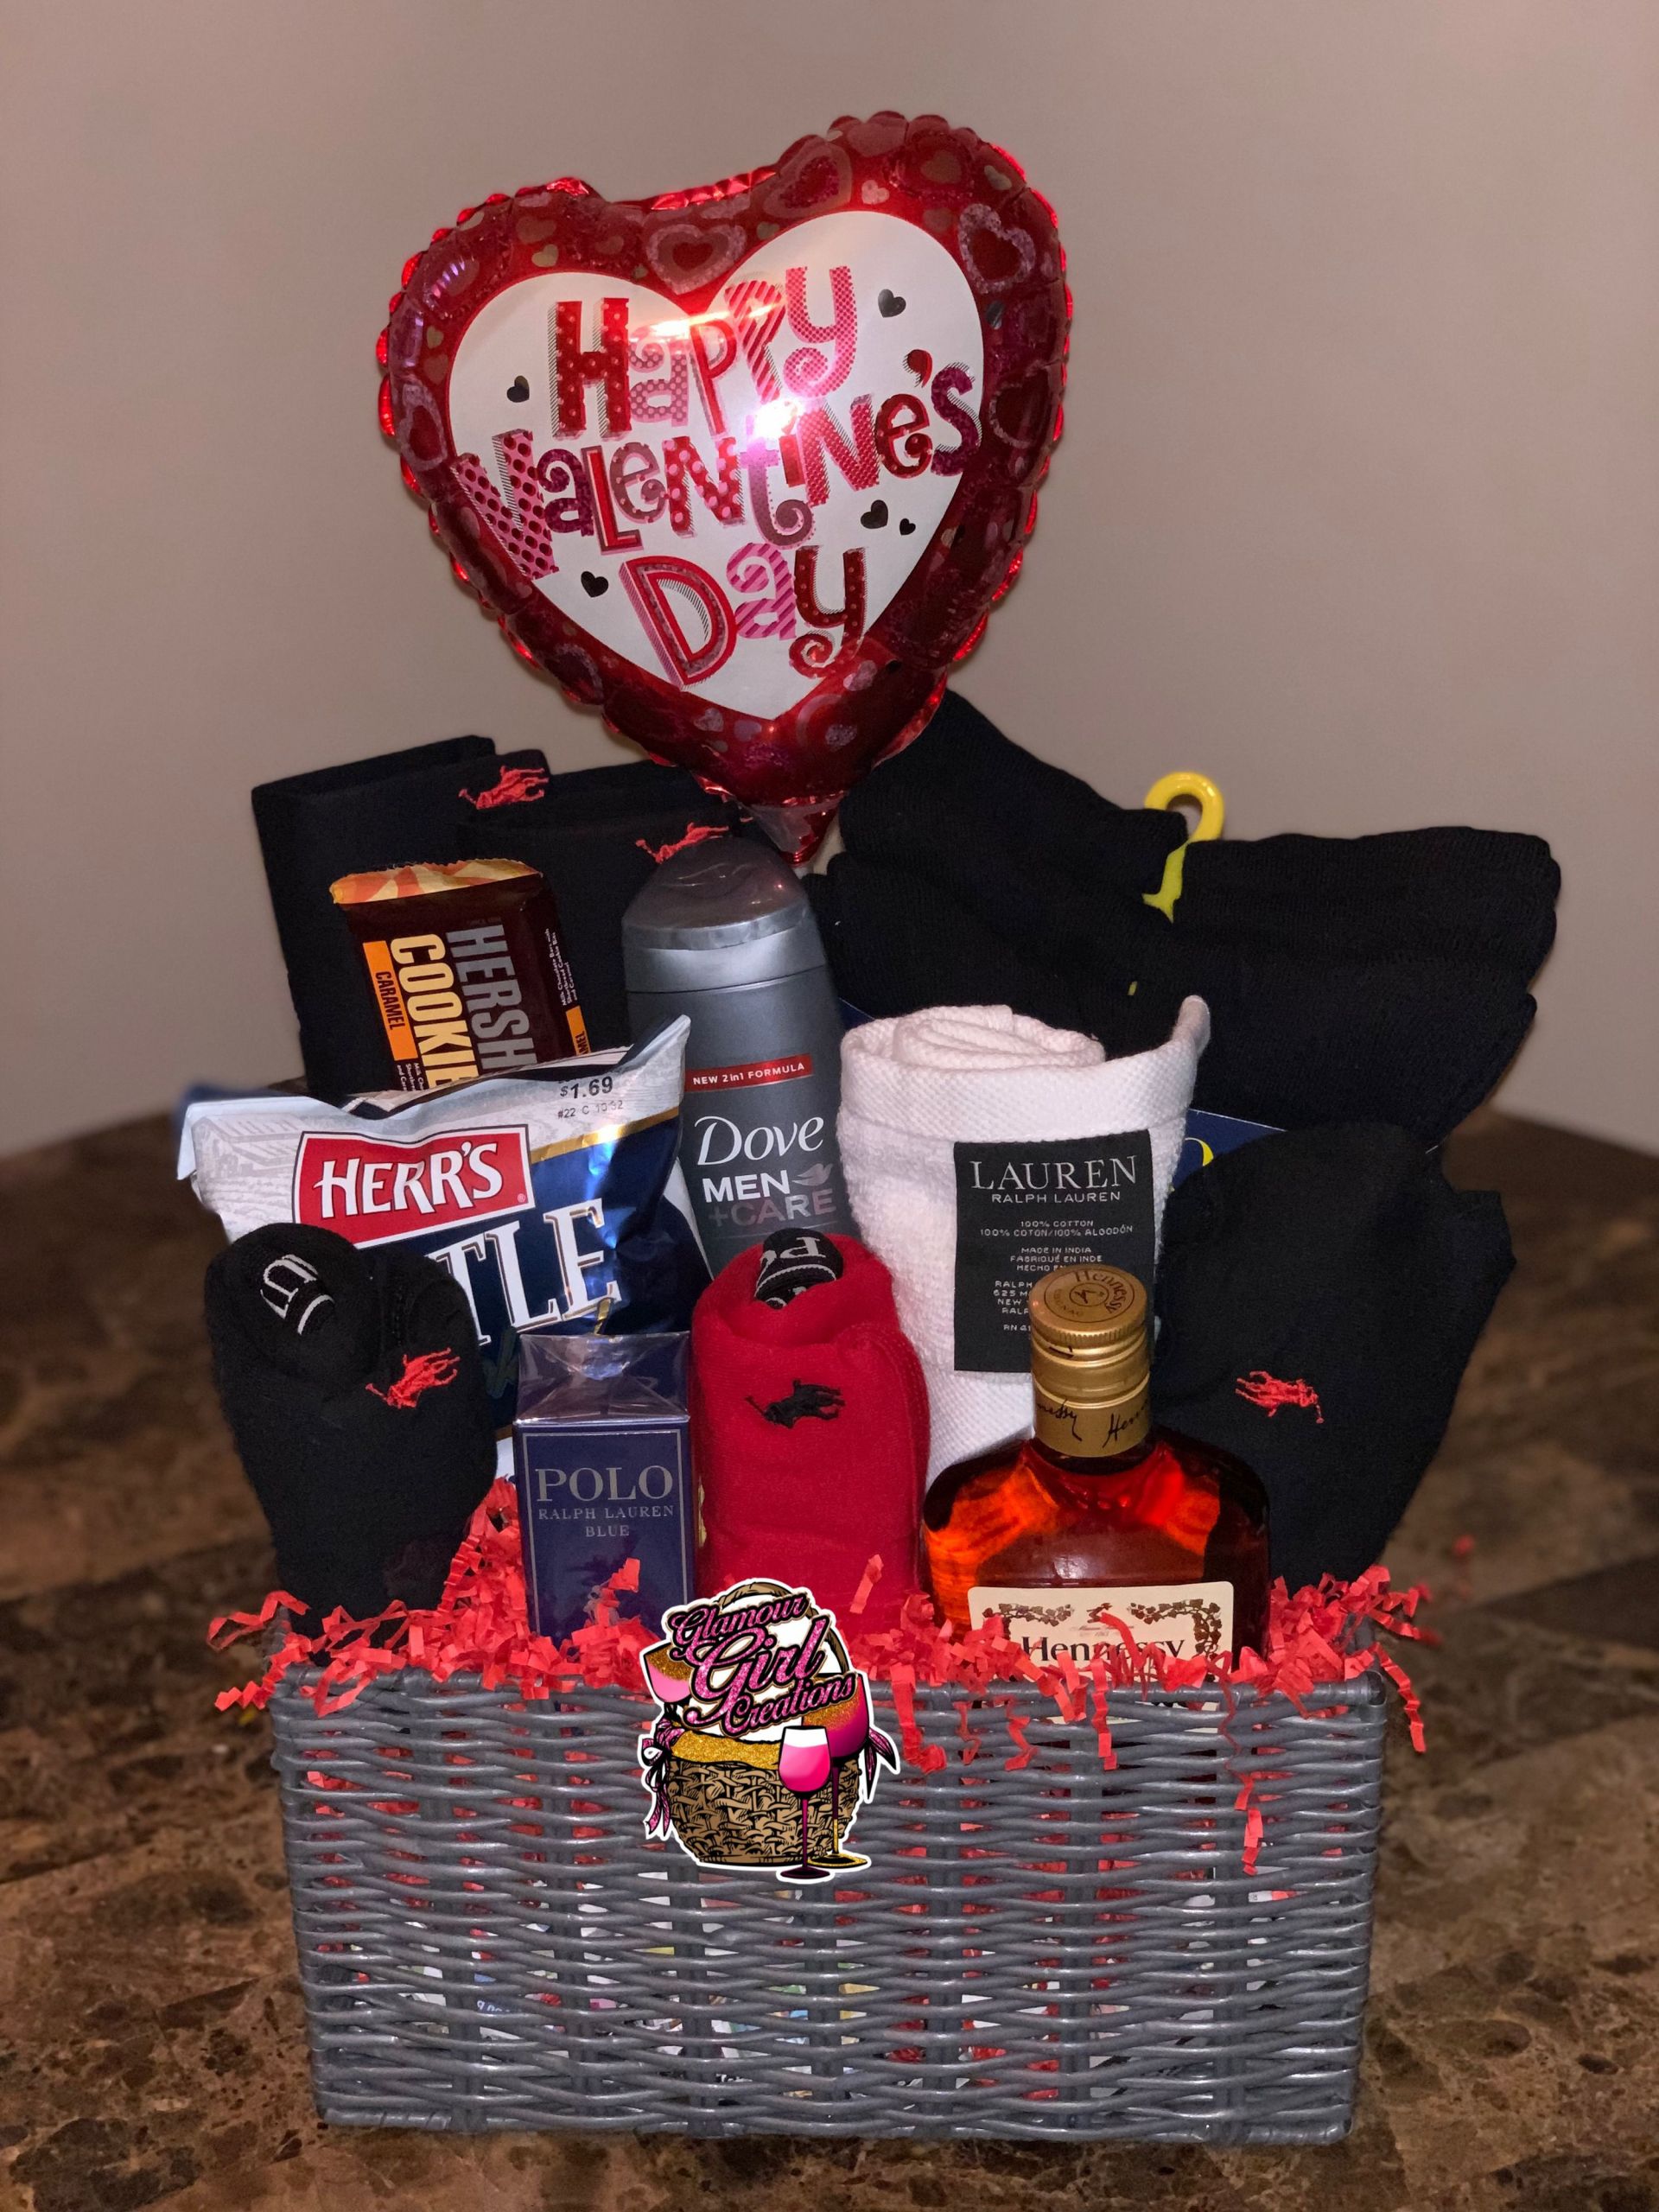 Homemade Gift Basket Ideas For Boyfriend
 Small Polo Basket With images